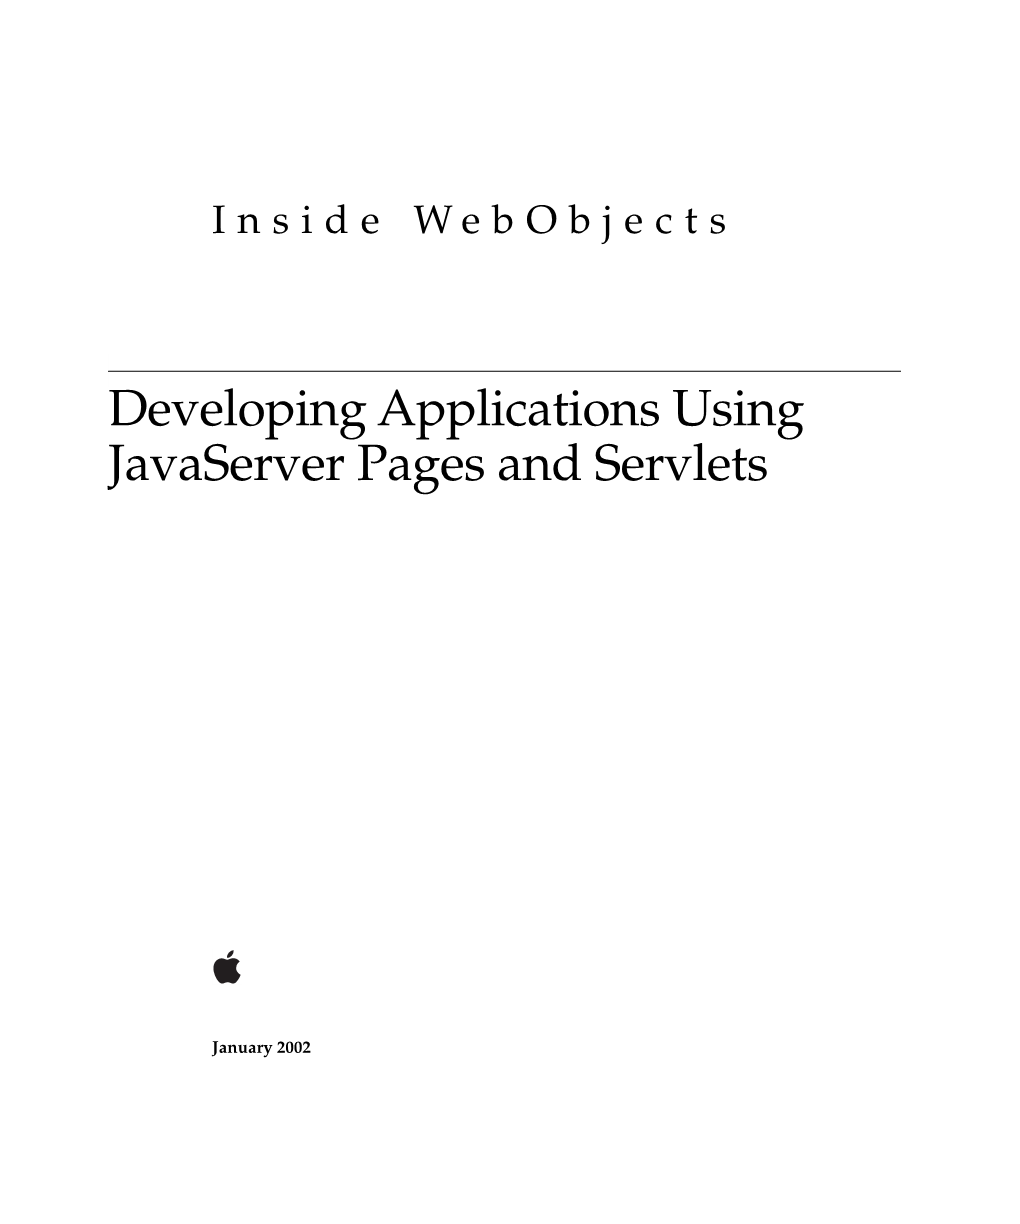 Developing Applications Using Javaserver Pages and Servlets